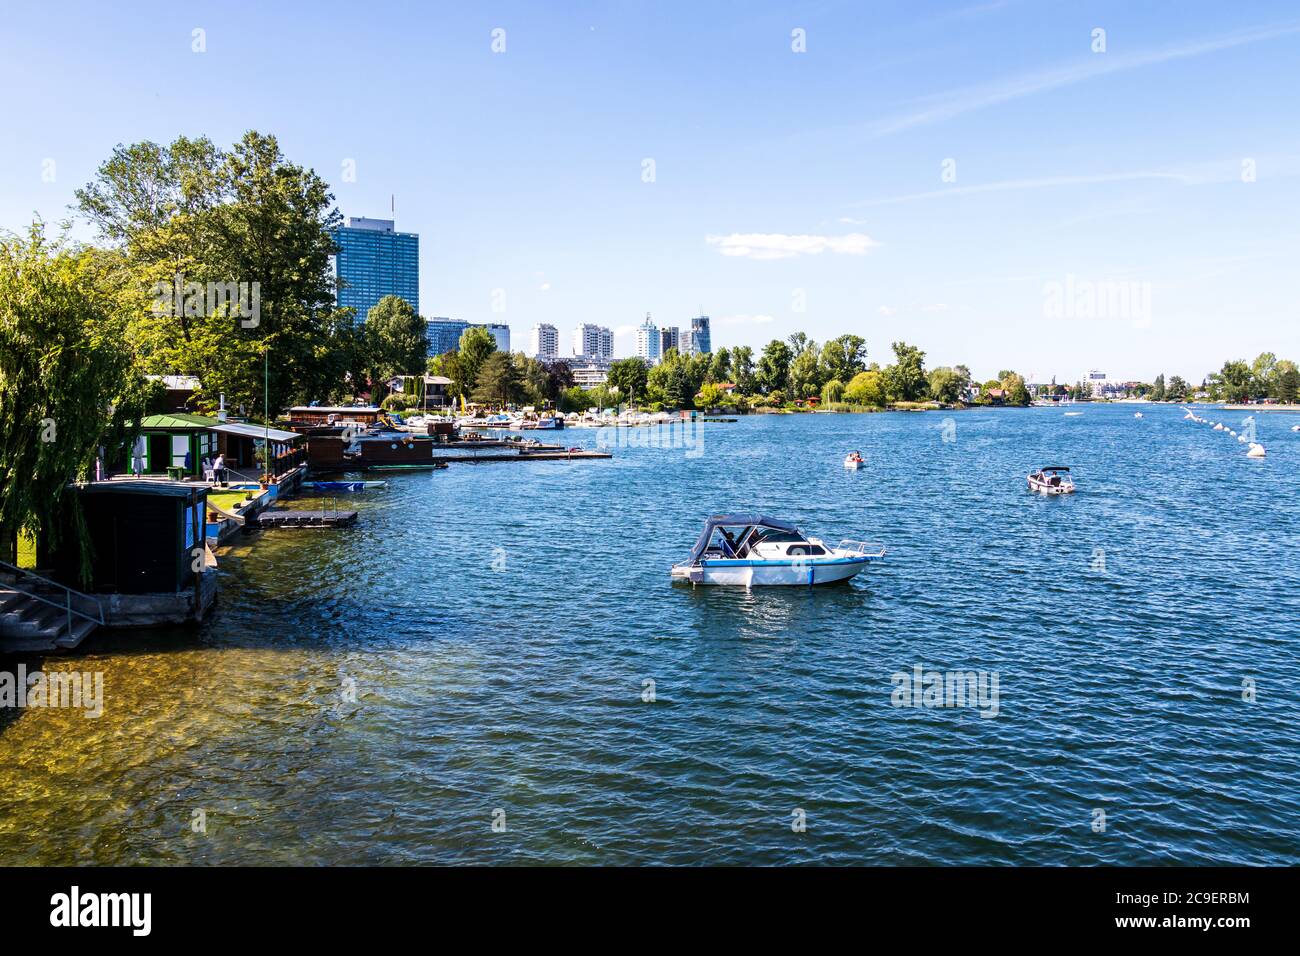 View on Old Danube River, ger. Alte Donau, with Boats, Landscape and Buildings in Vienna, Austria, Europe Stock Photo